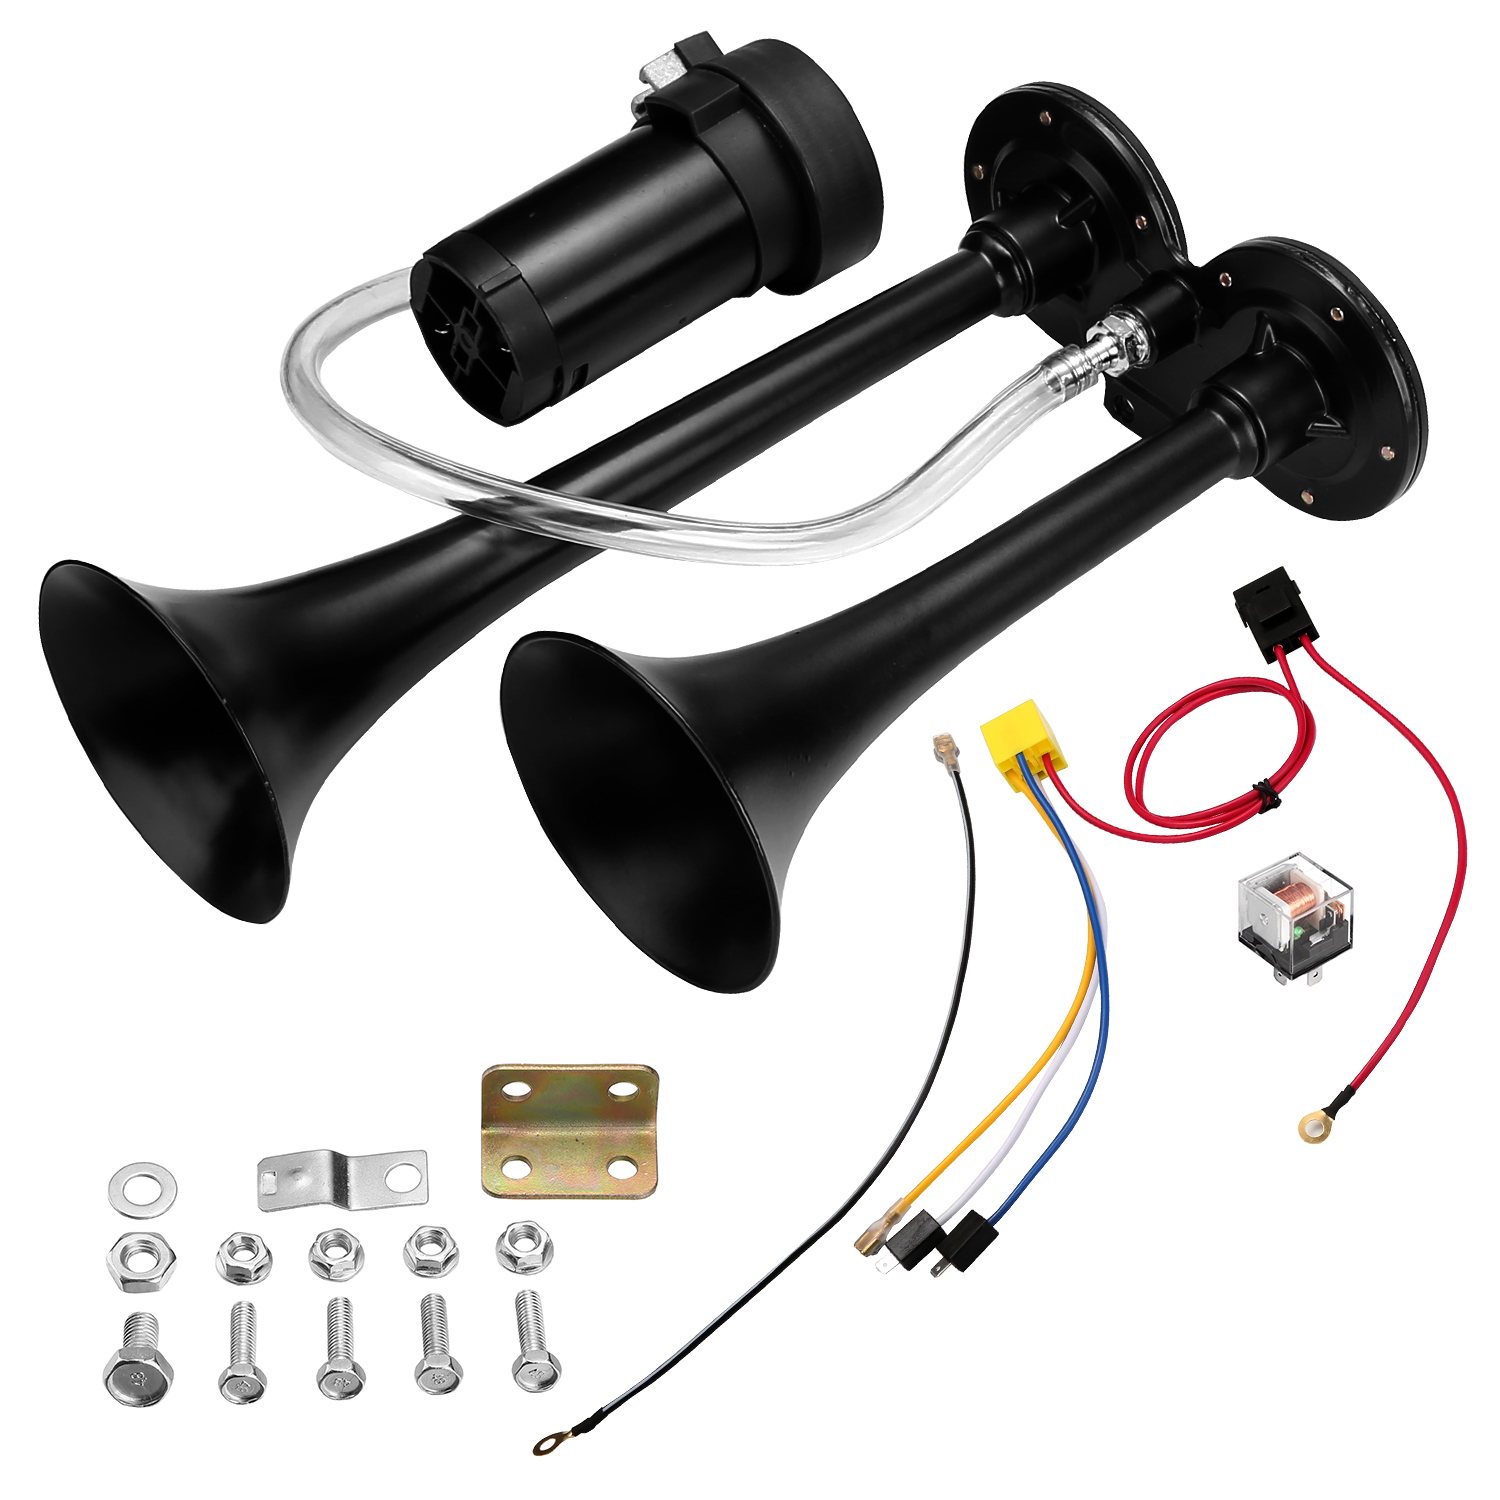 HK 12V 150db Air Horn, 18 Inches Chrome Zinc Single Trumpet Truck Air Horn with Compressor for Any 12V Vehicles Trucks Lorrys Cars Trains Boats Kit, Black